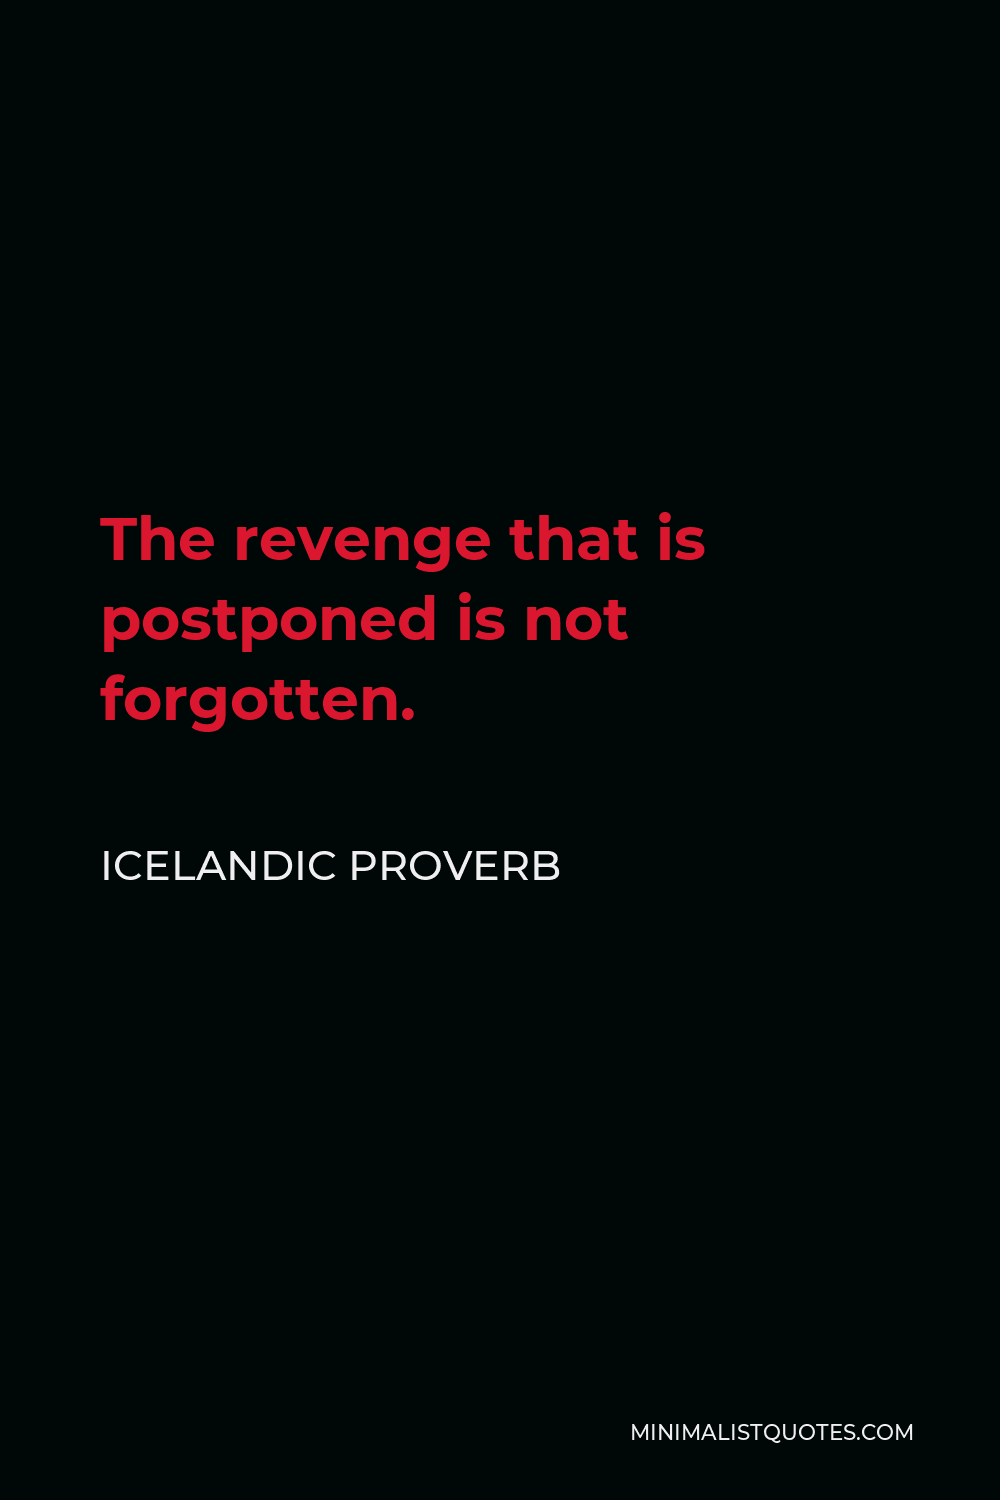 Icelandic Proverb Quote - The revenge that is postponed is not forgotten.